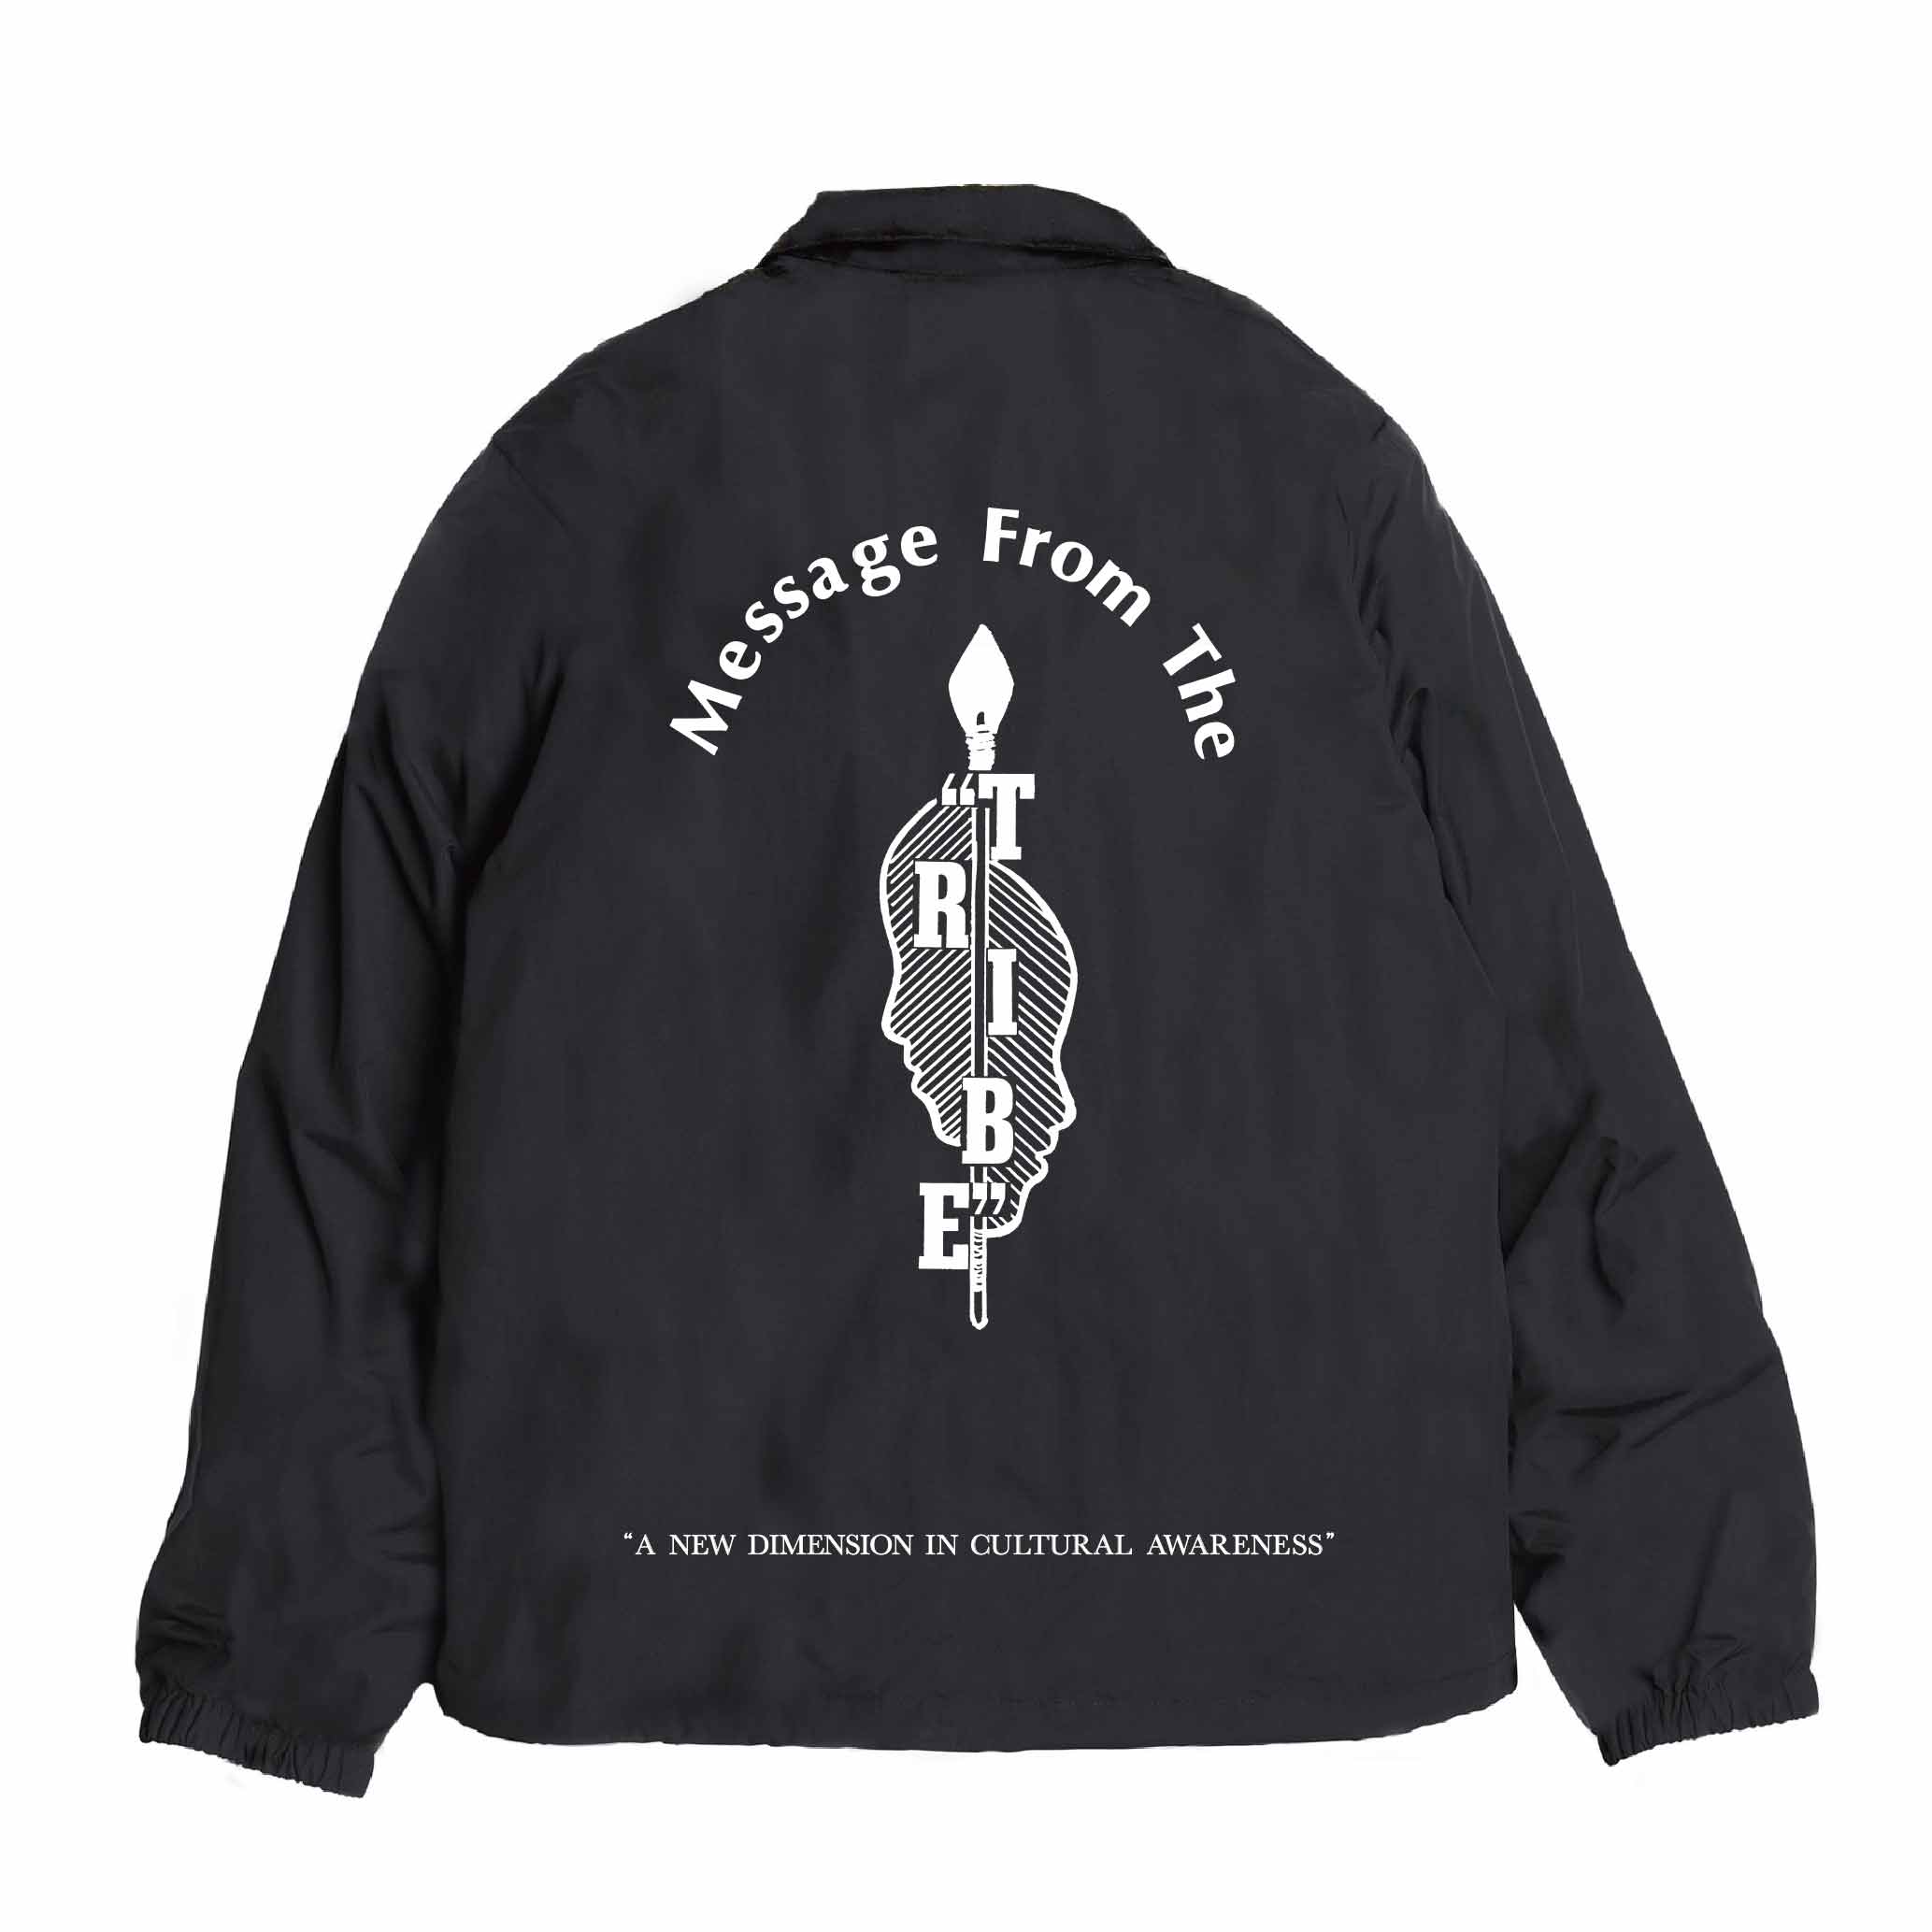 Message From the Tribe Jacket